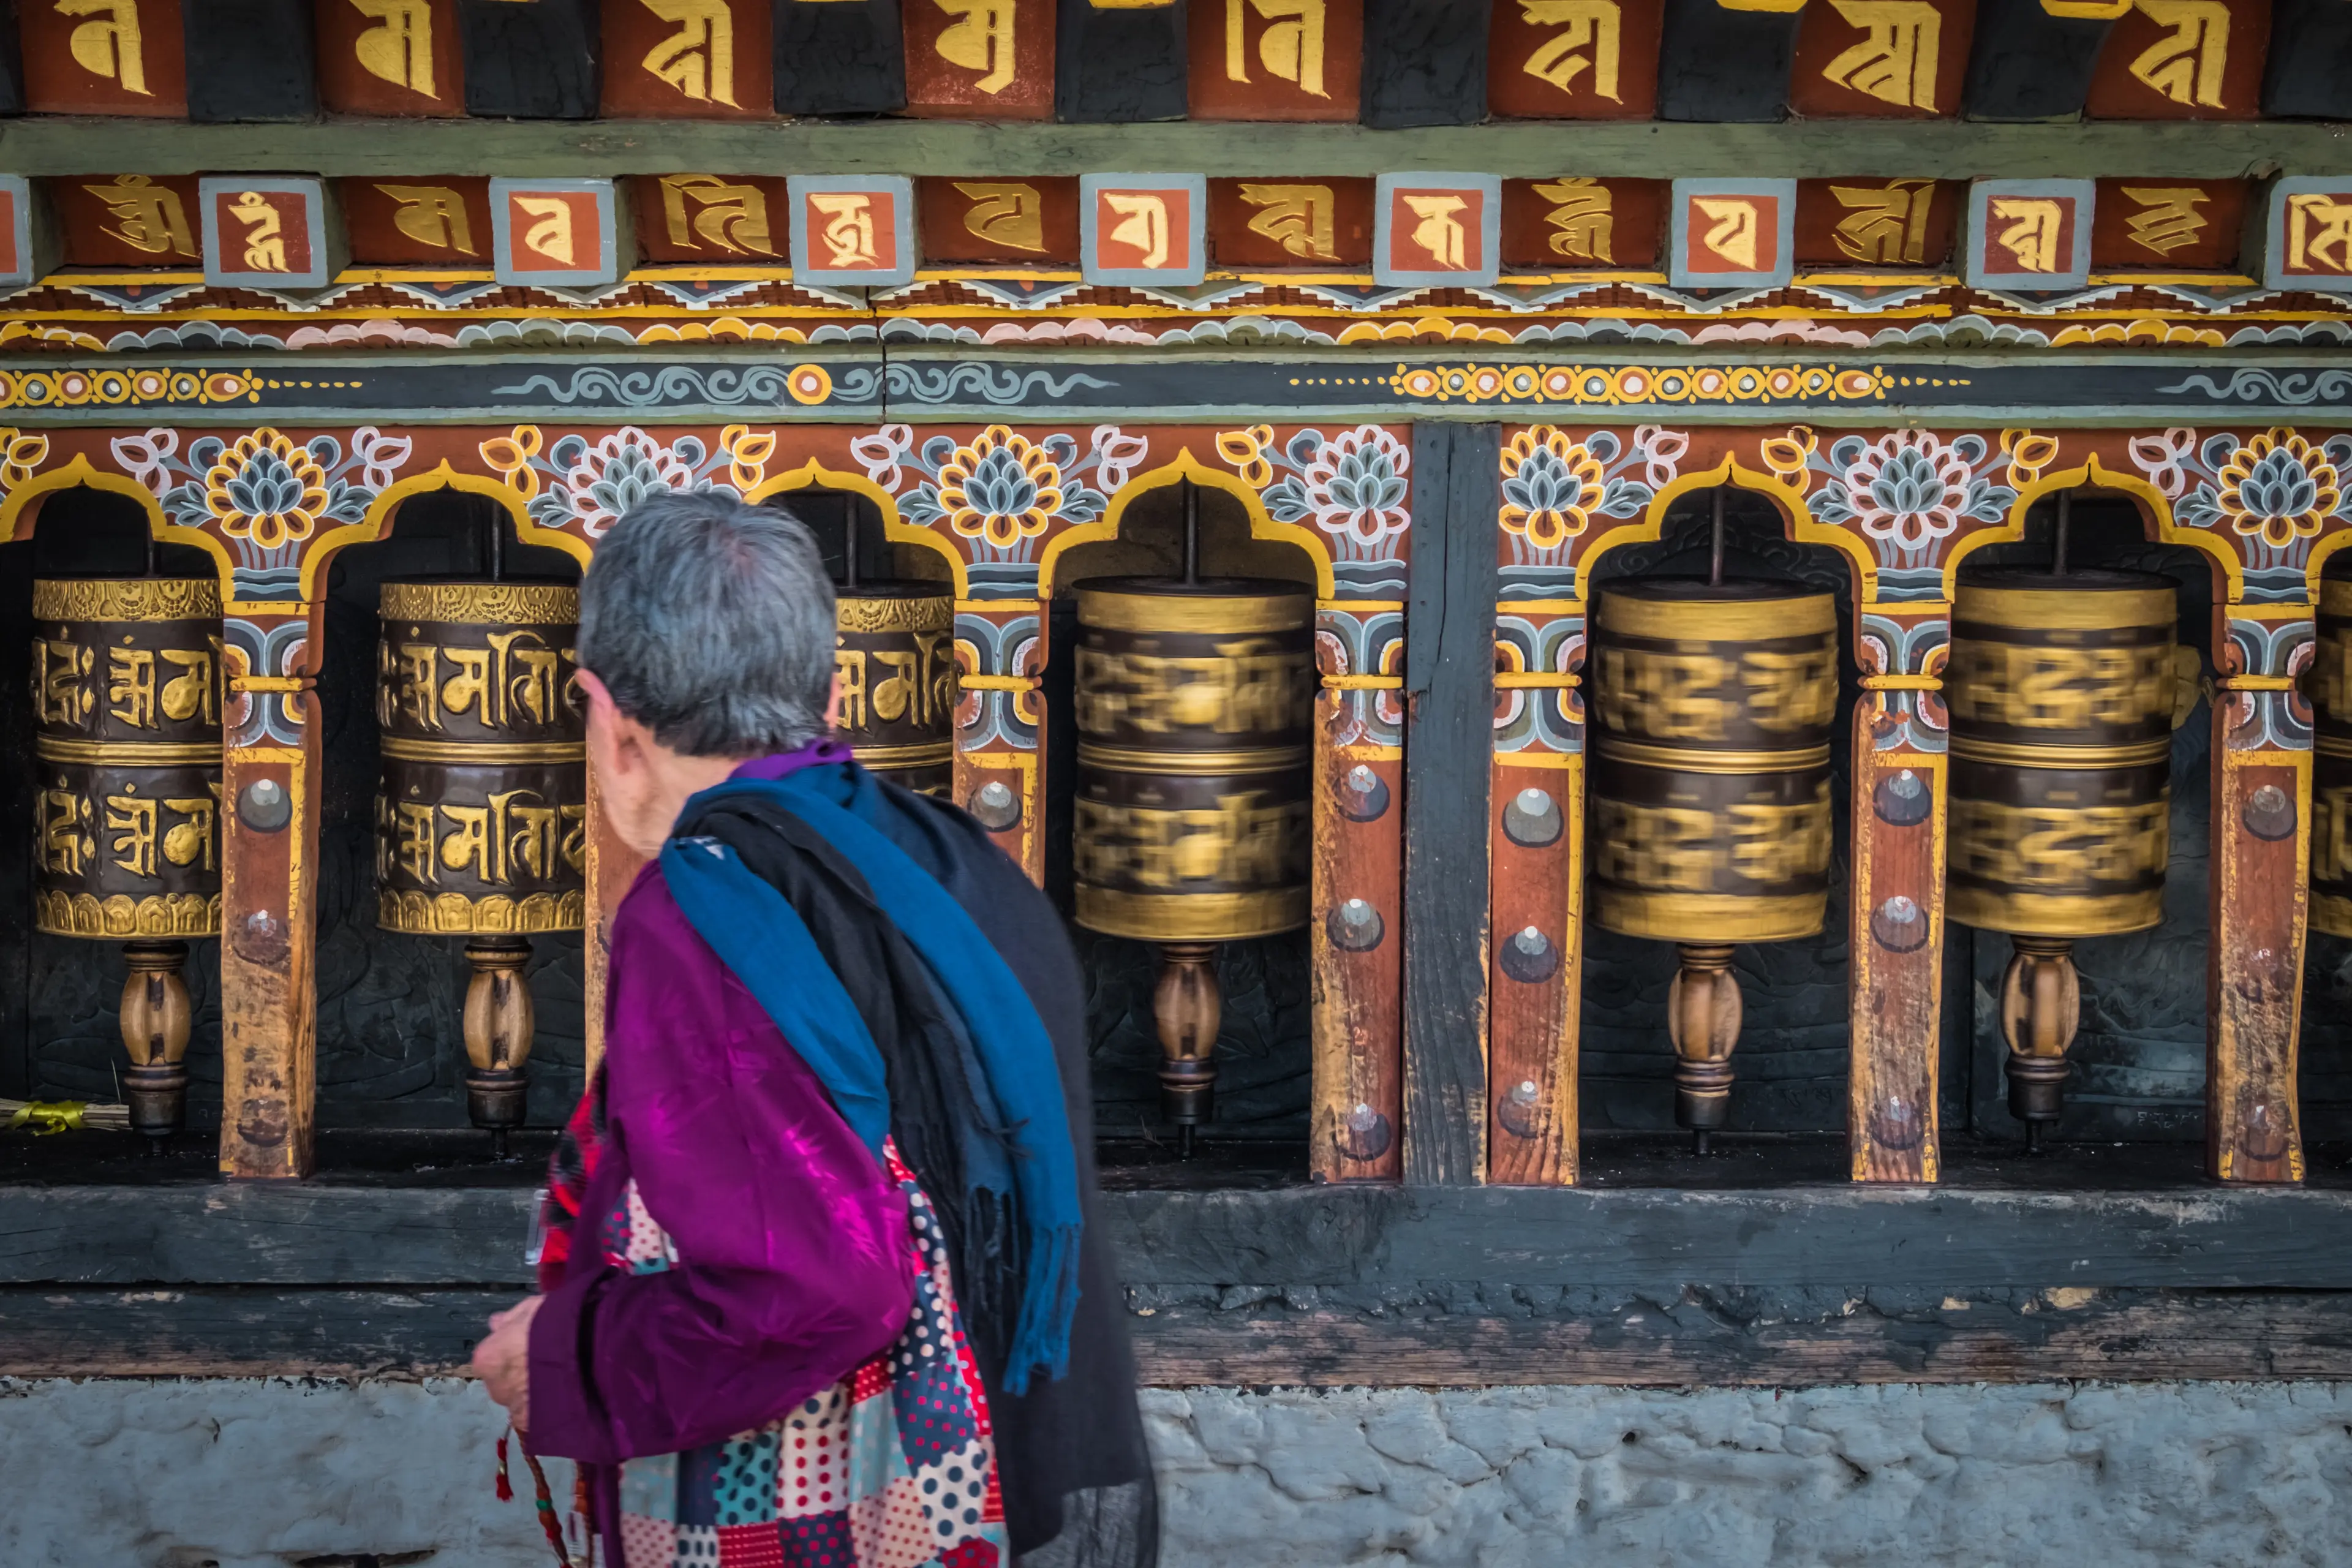 An old woman spinning prayer wheels in Thimphu